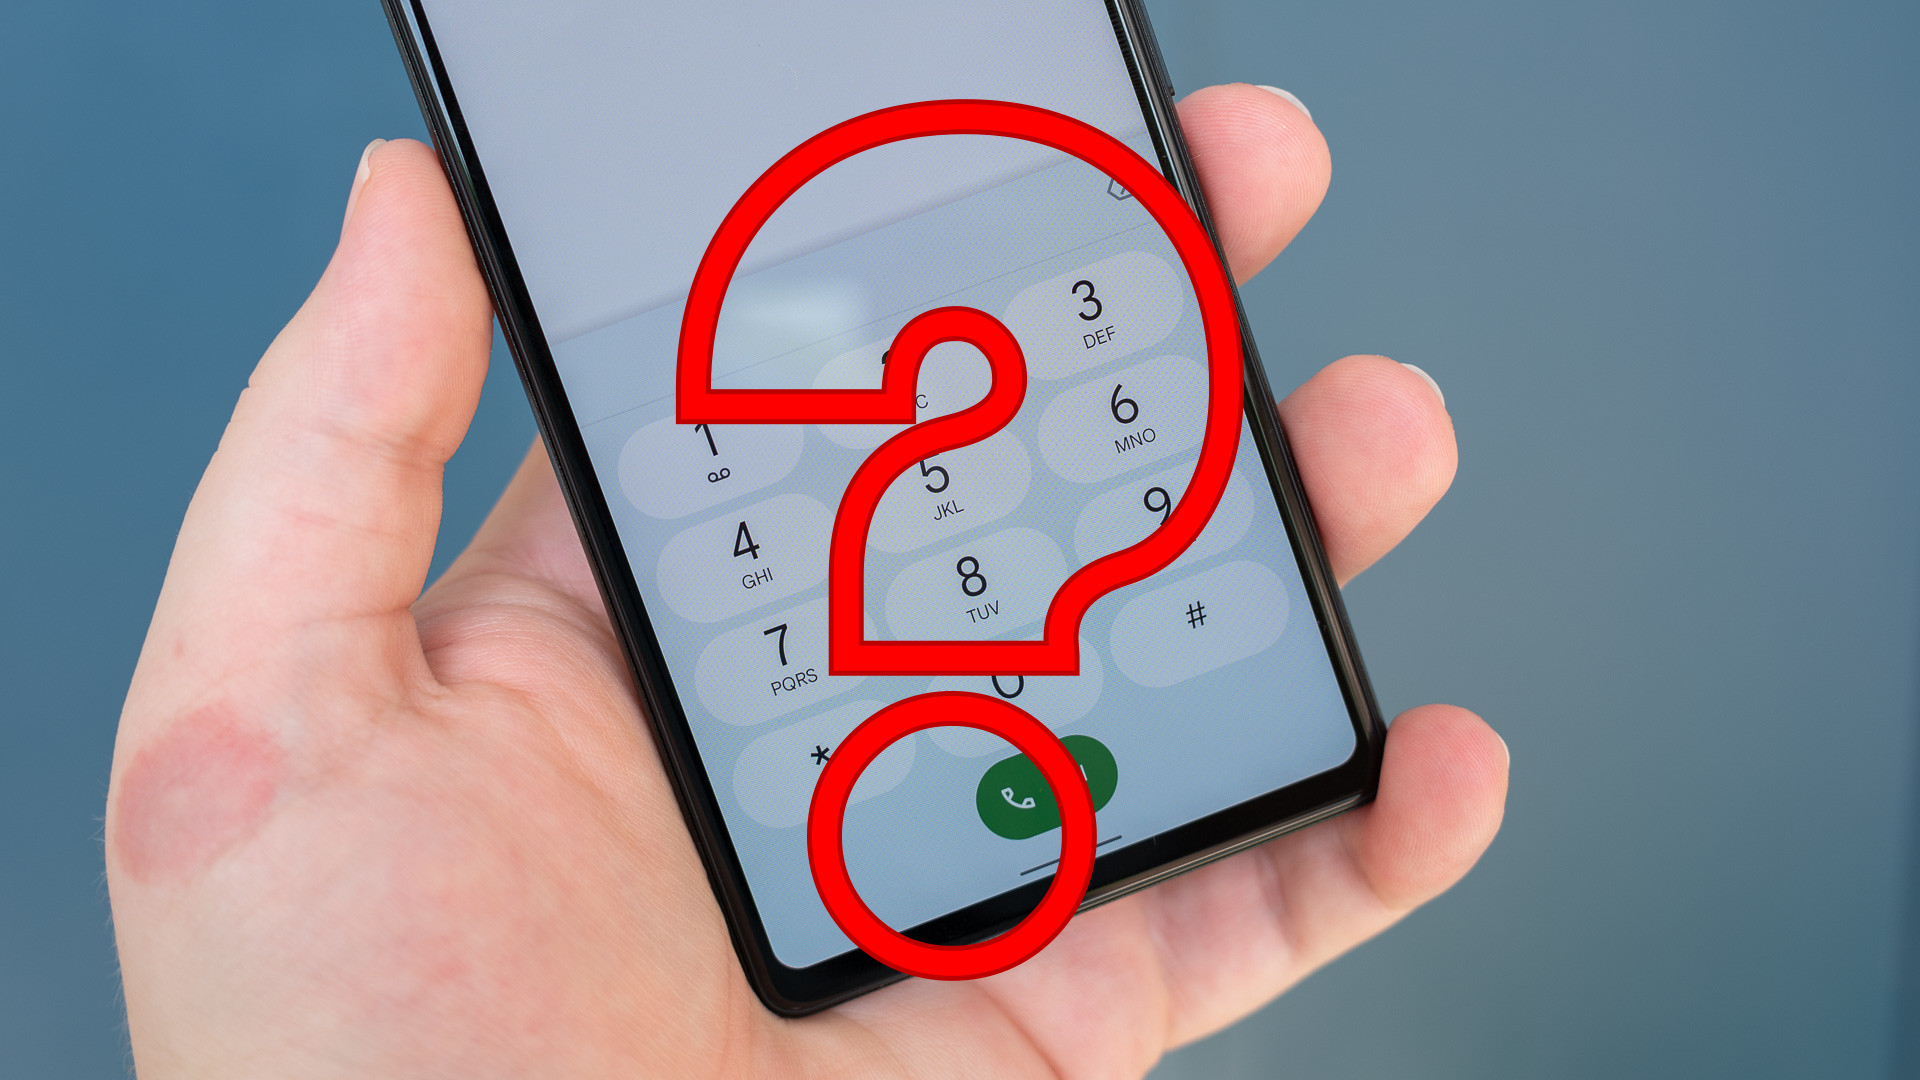 Android dialer with question mark.